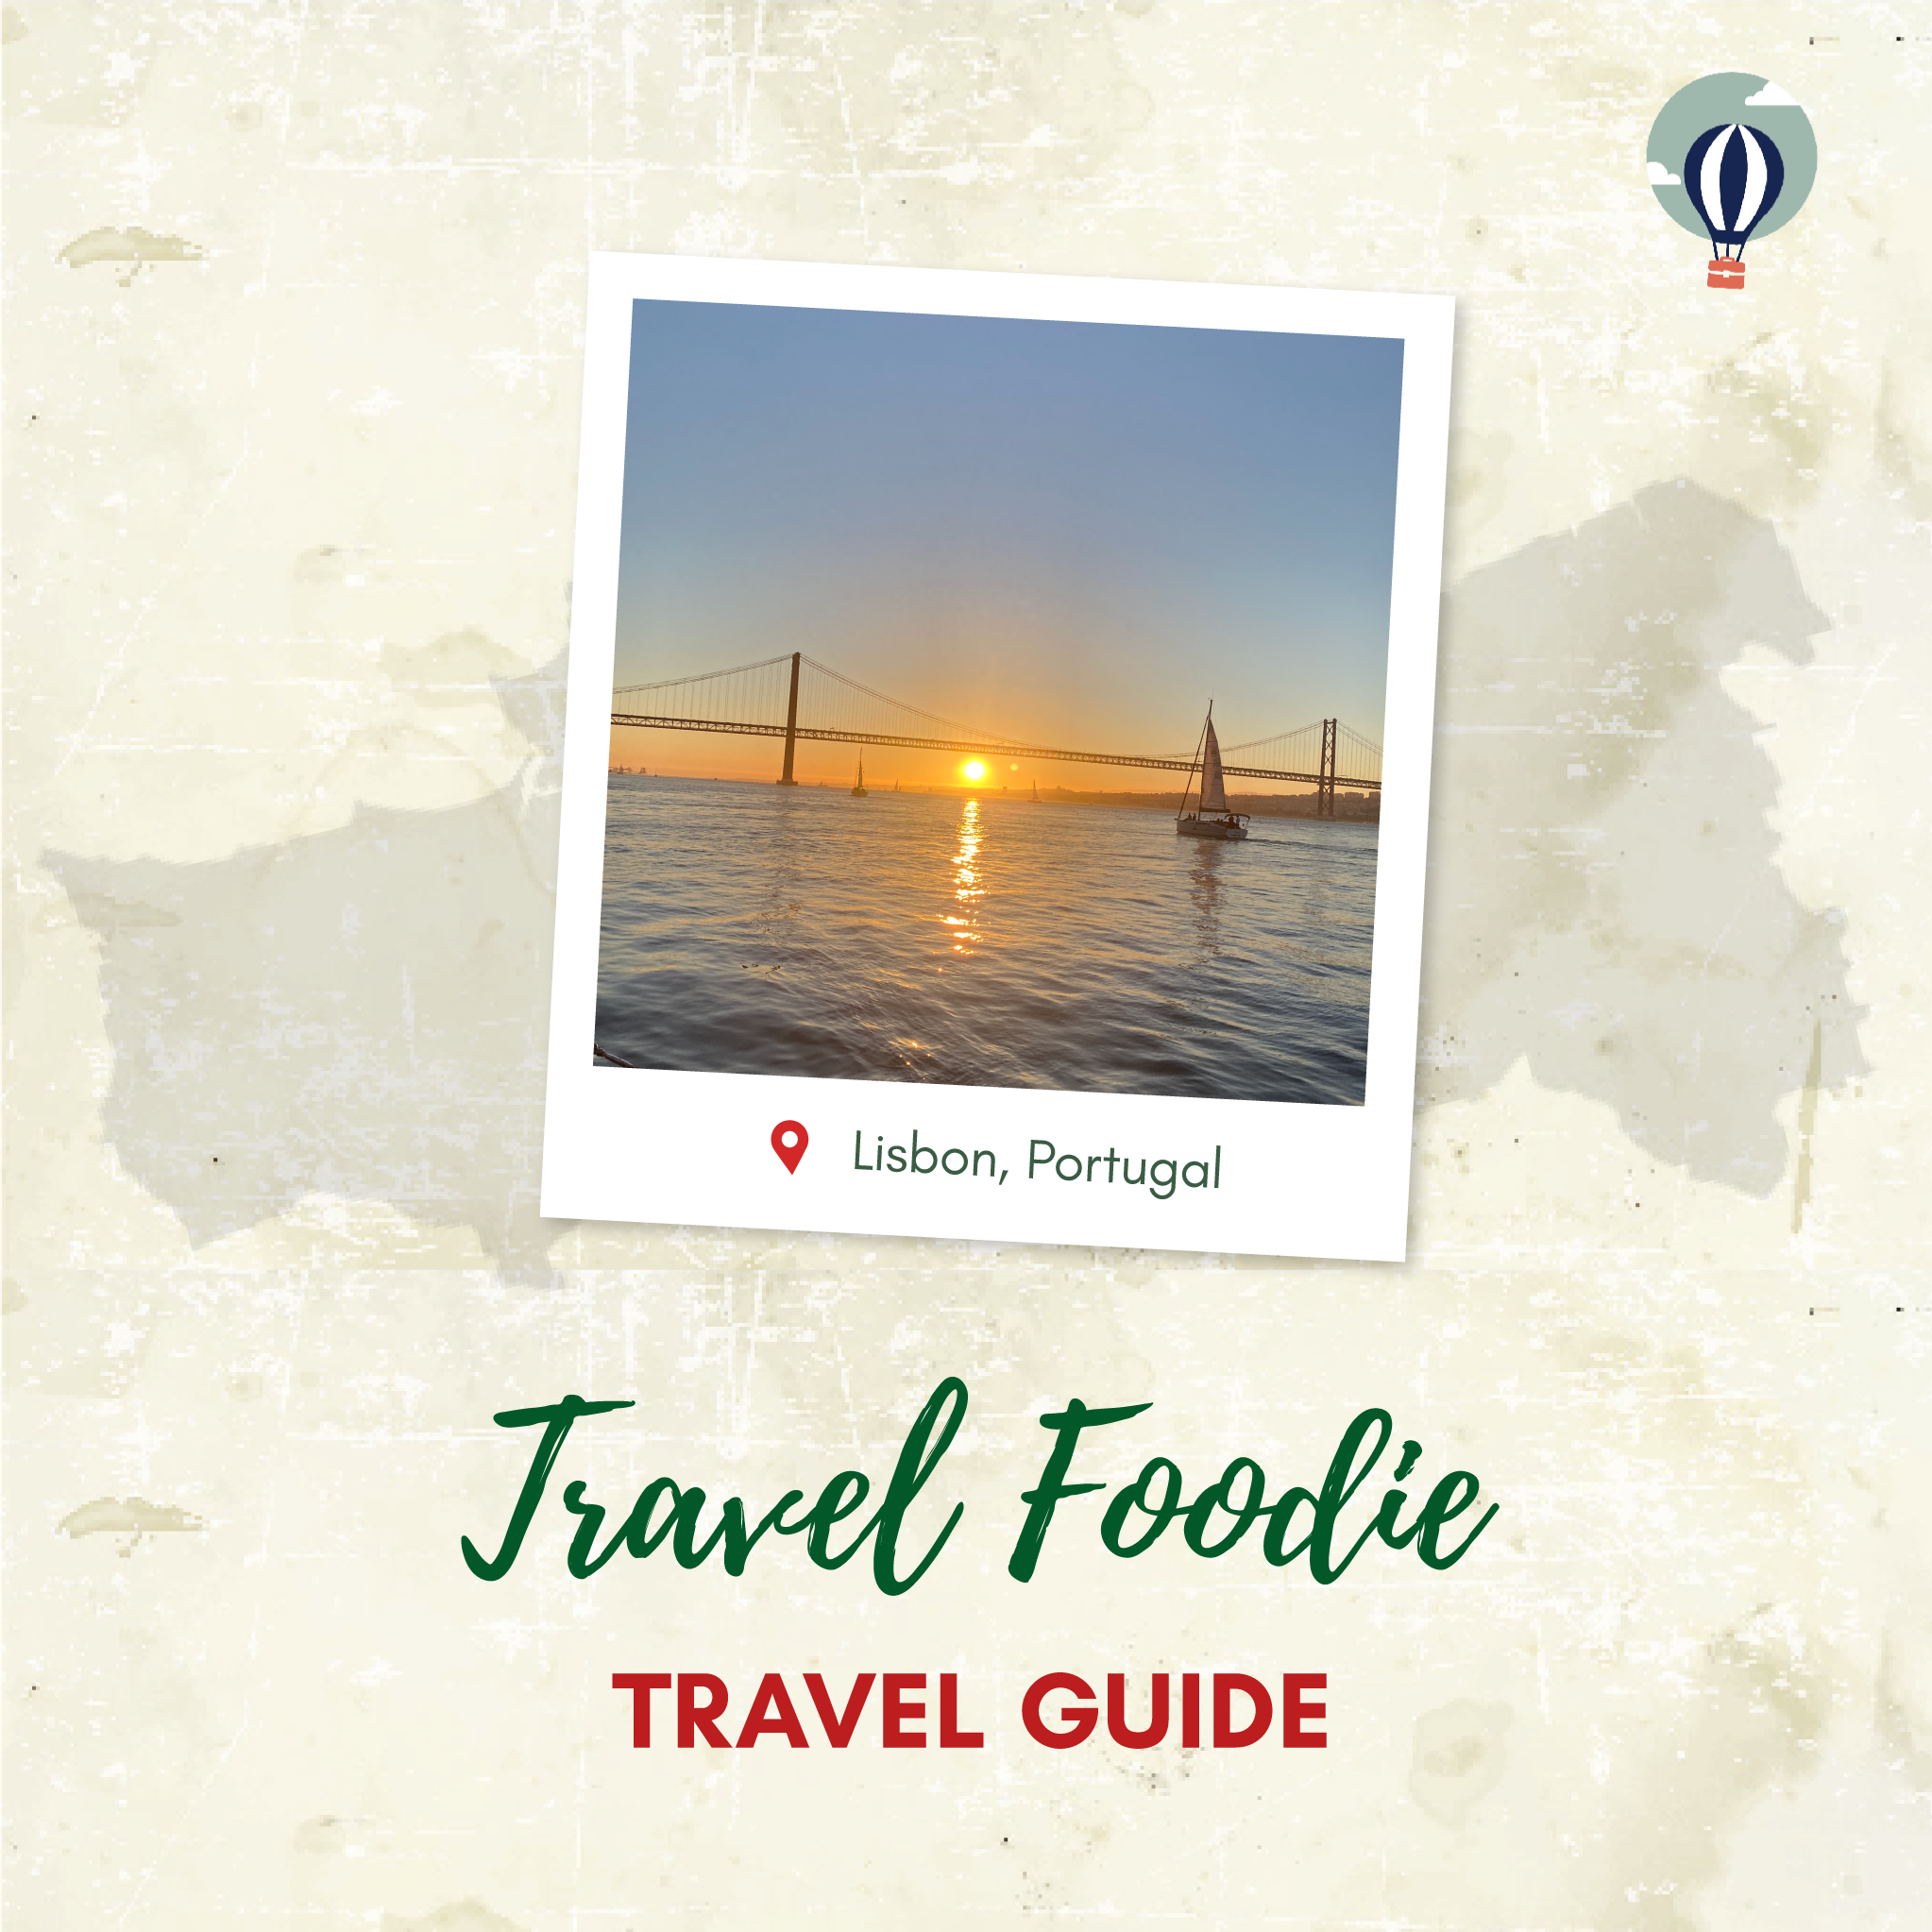 Lisbon Portugal Travel Itinerary Planner for Travel Foodies, Cover